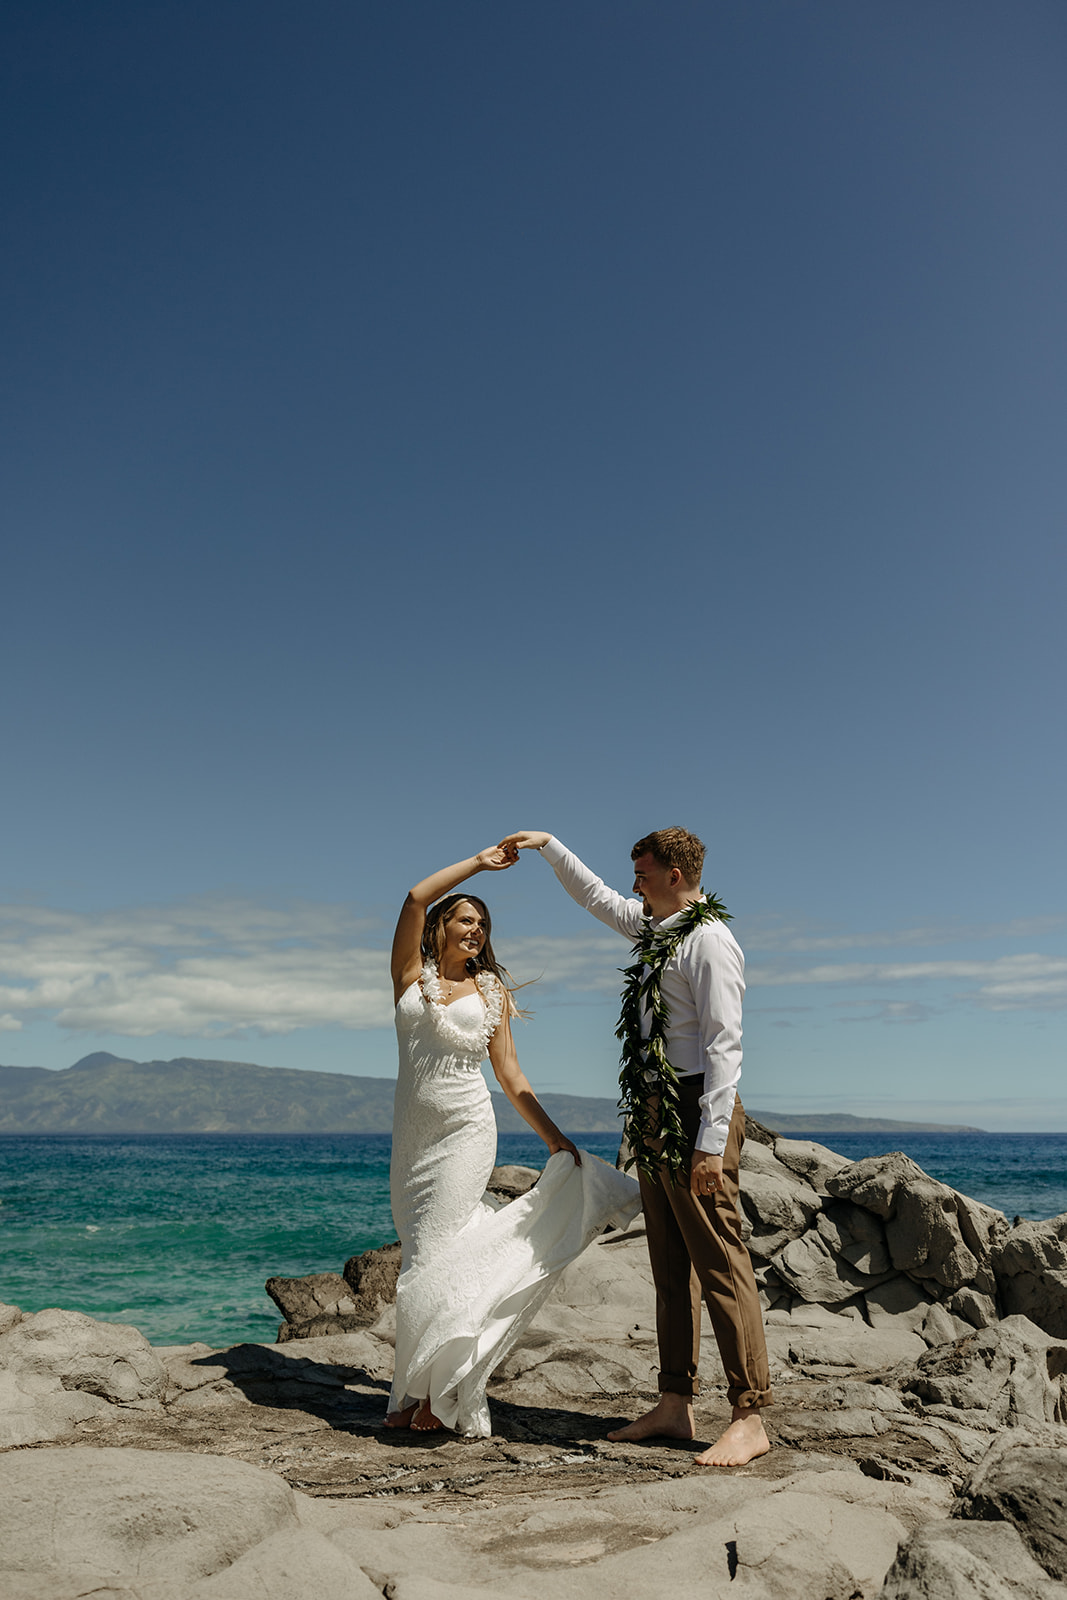 Couple eloped at the Ironwoods Beach in Maui, Hawaii wearing traditional lei